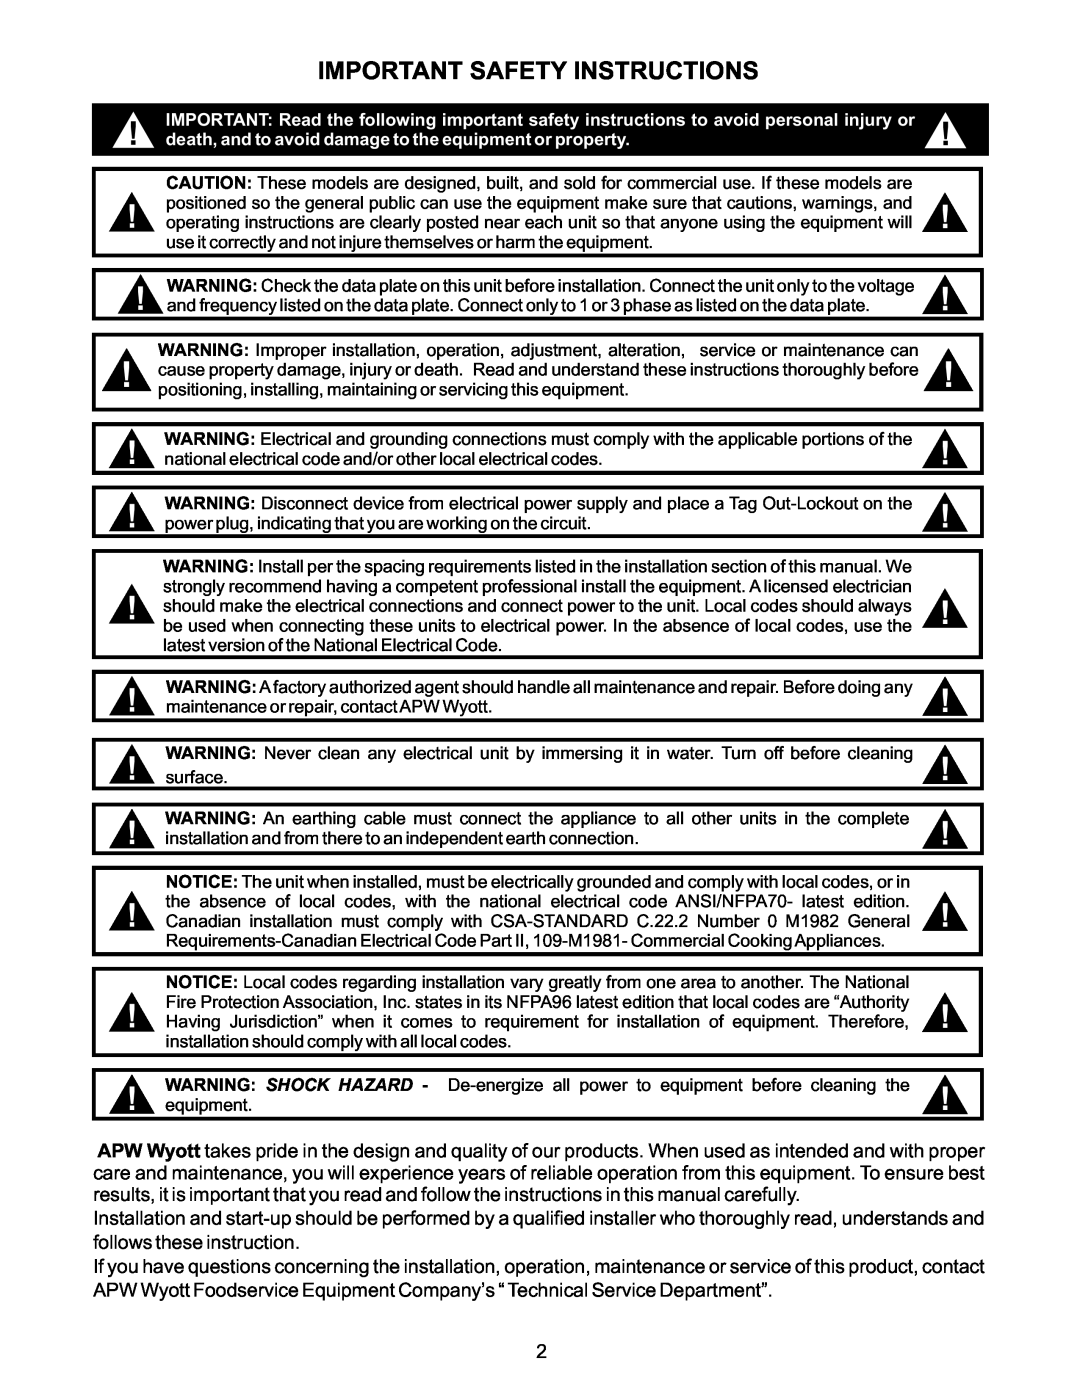 APW Wyott MPC-1A manual Important Safety Instructions 